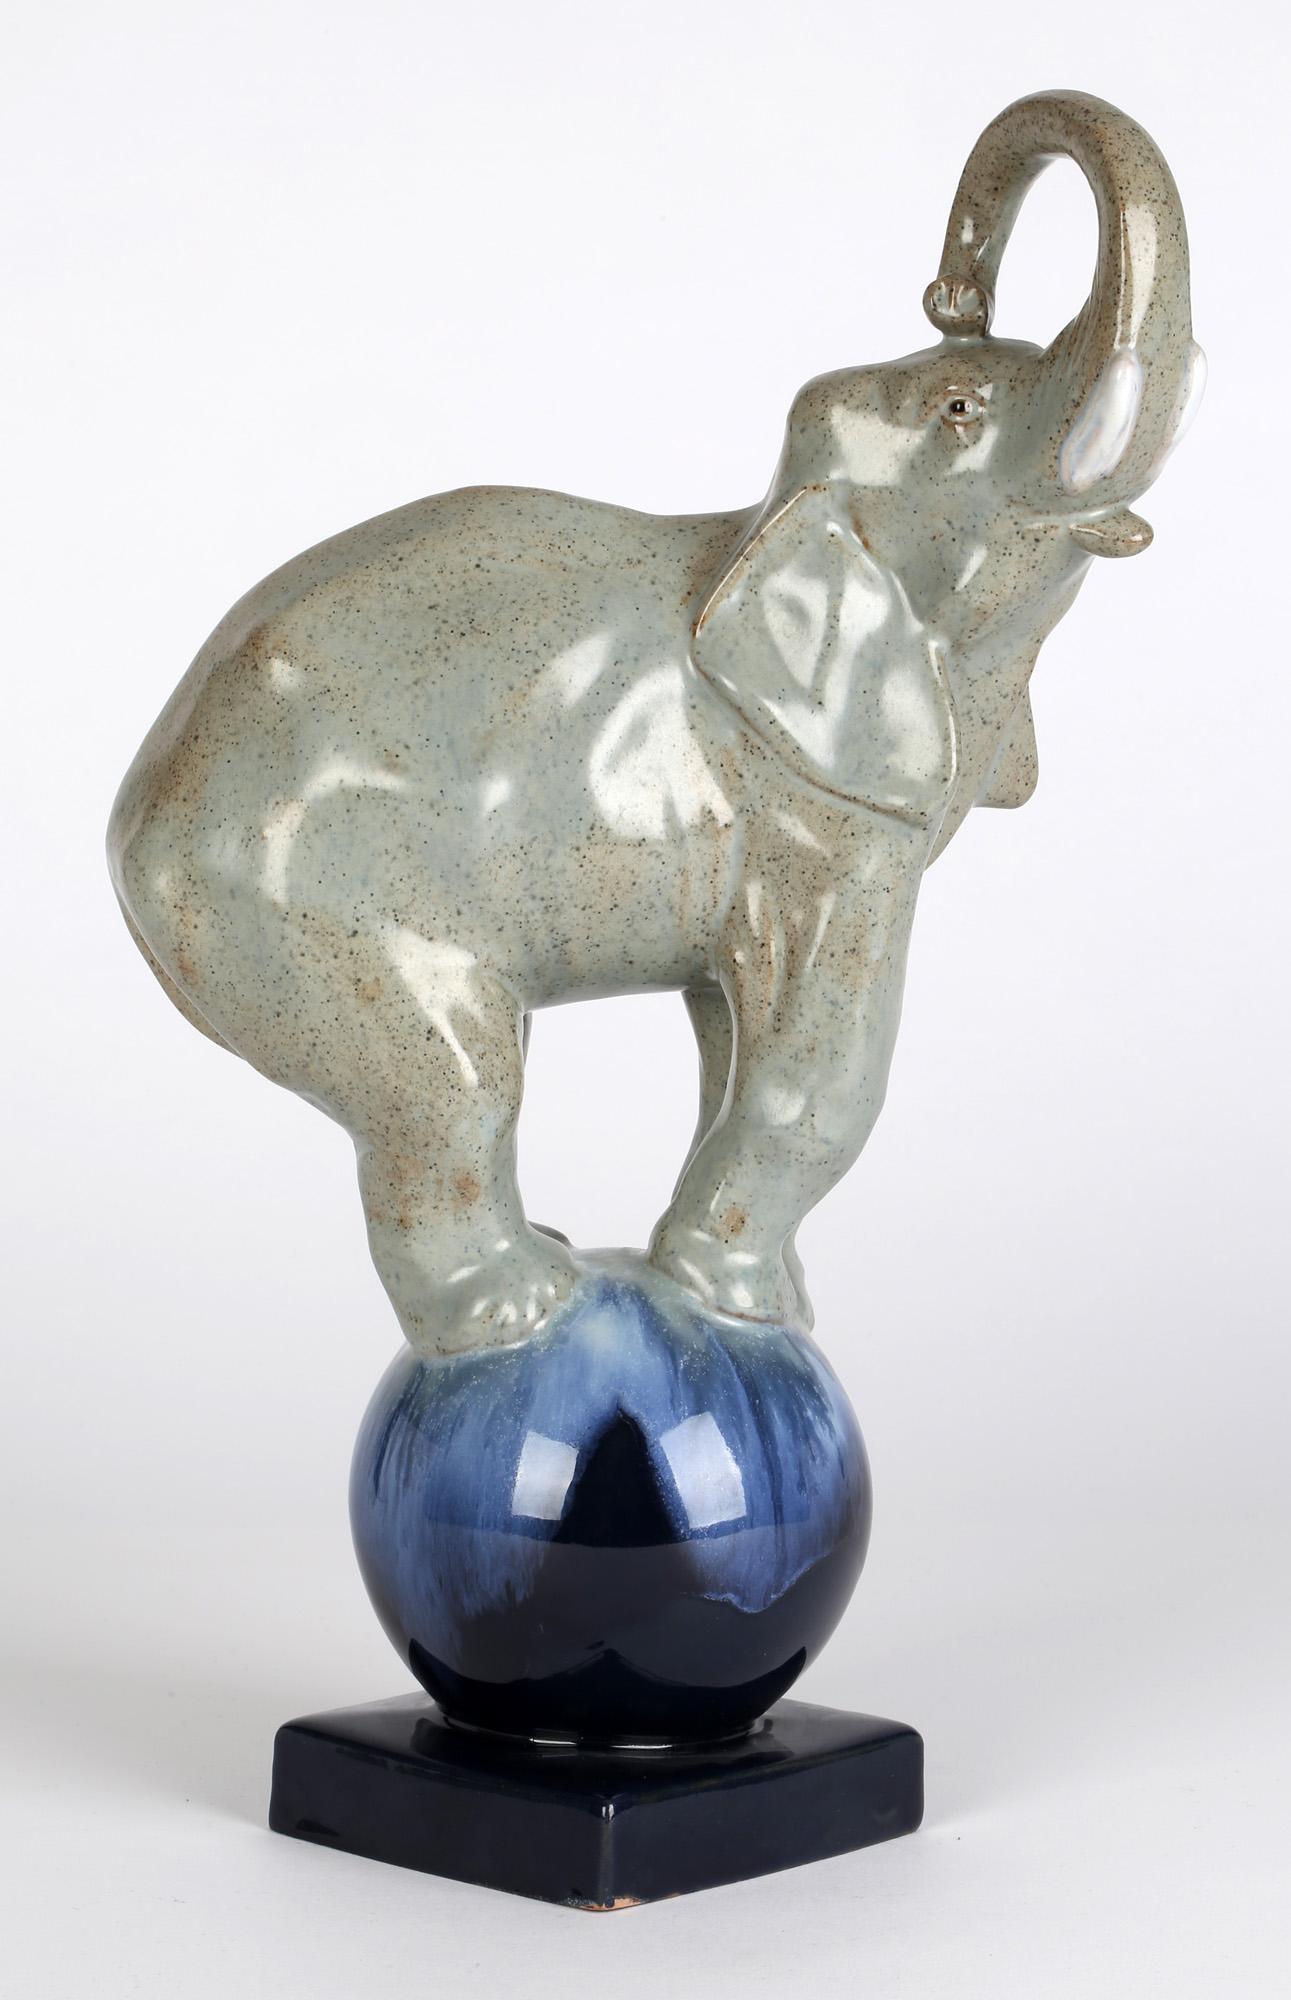 A stunning French Art Deco glazed pottery sculpture of a circus elephant balanced on a ball dating from around 1925. The figure made from a terracotta colored clay portrays an elephant balanced on rounded ball mounted on a square shaped pedestal